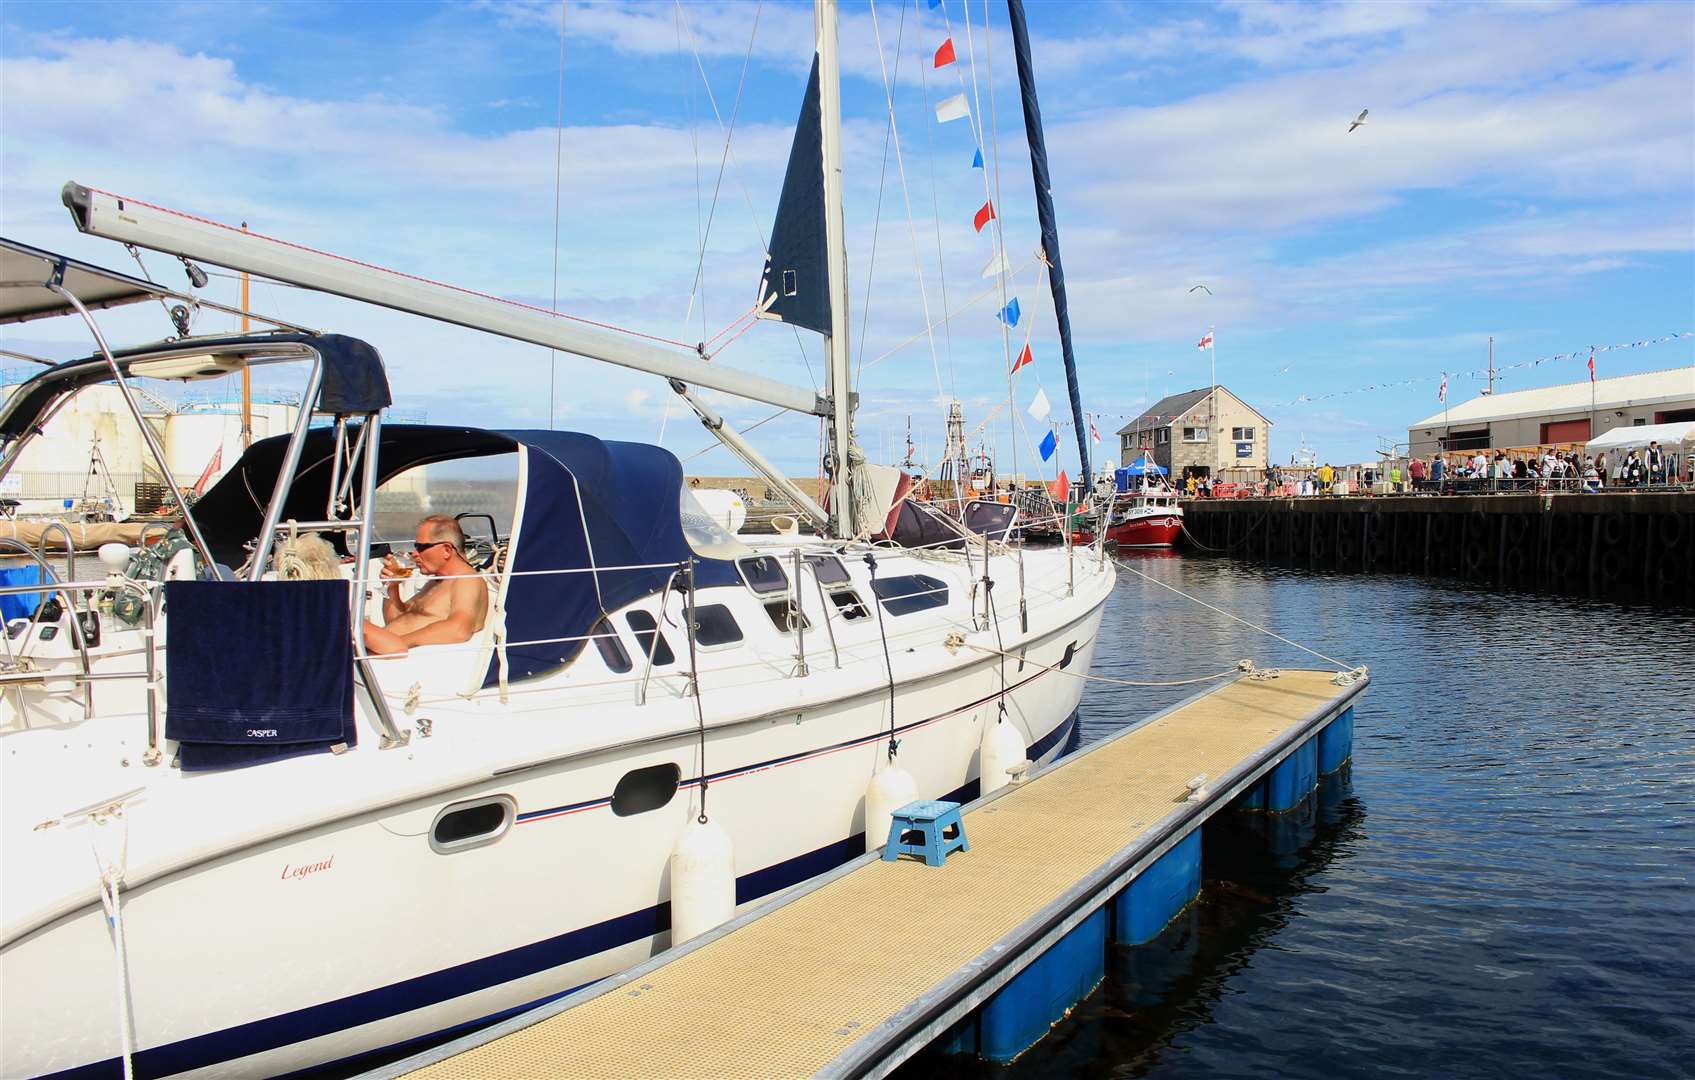 Local boats were joined by visiting yachts in sunny Wick. Picture: Alan Hendry